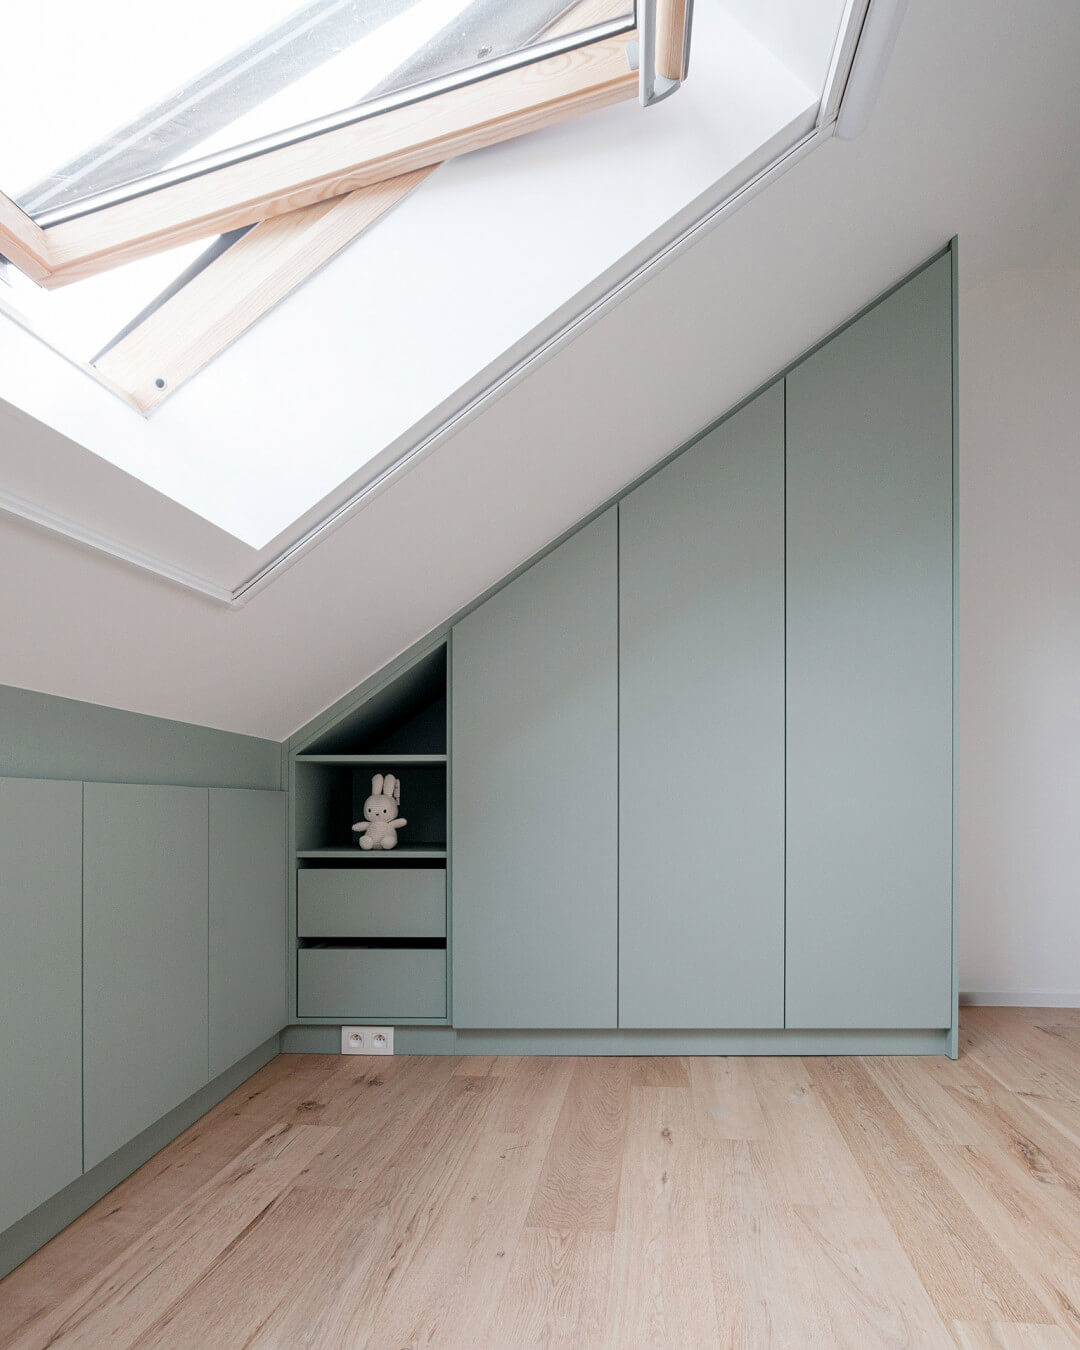 bespoke cupboards under a sloping roof